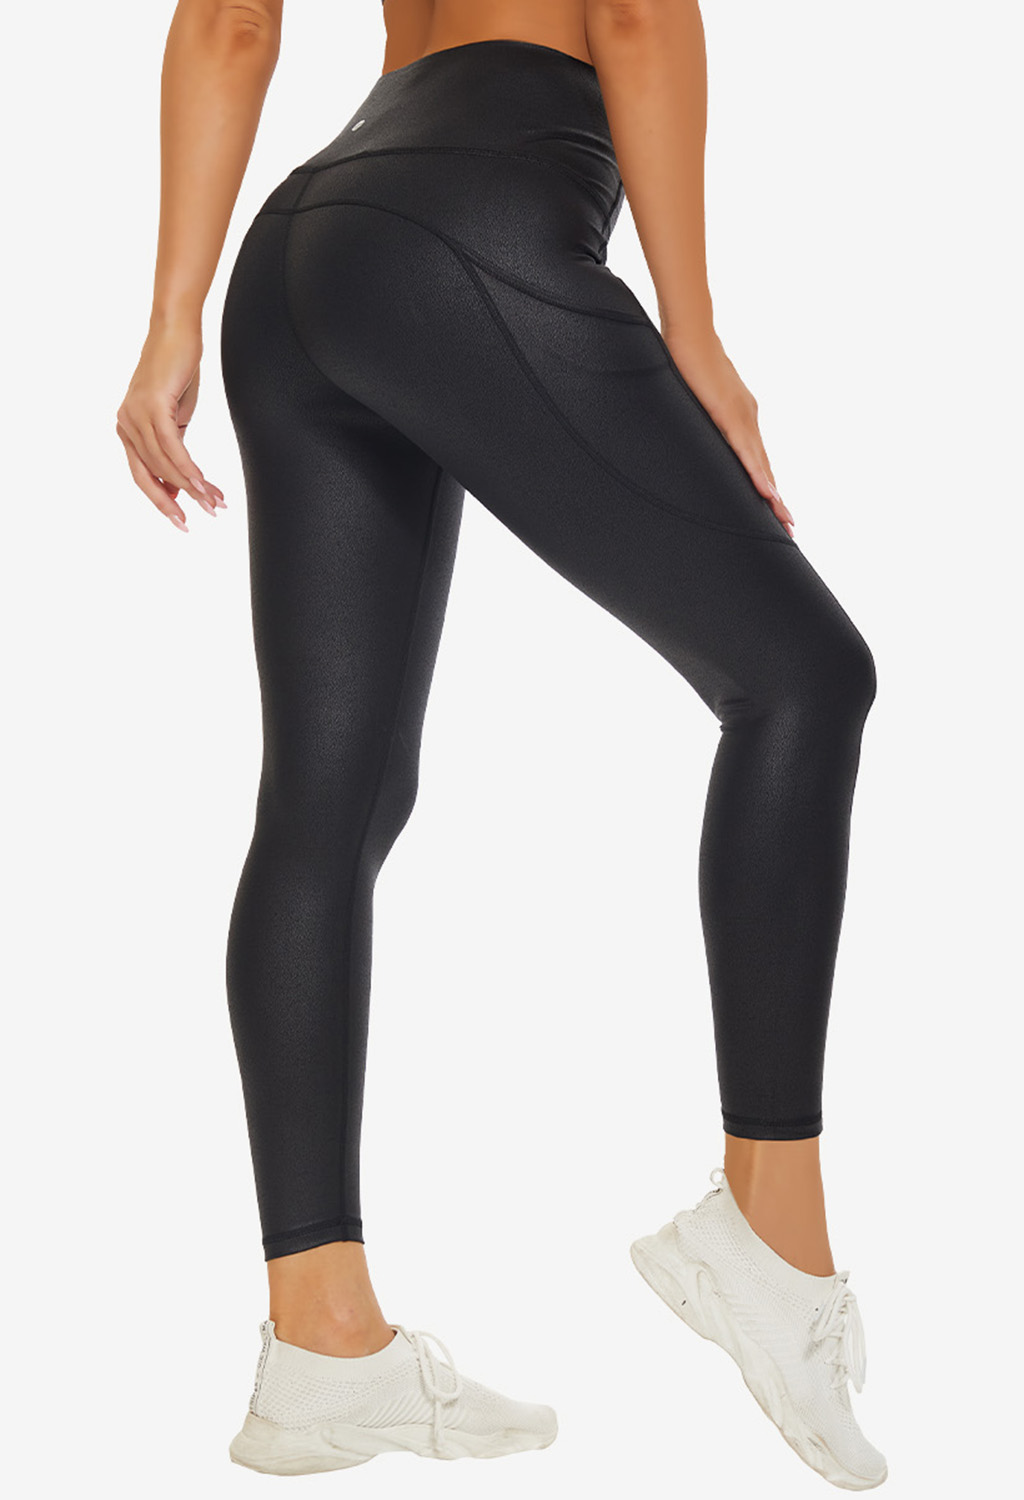 KYRIAD Matte Faux Leather Workout Leggings for Women Tummy Control 7/8  Stretchy Pleather High Waist